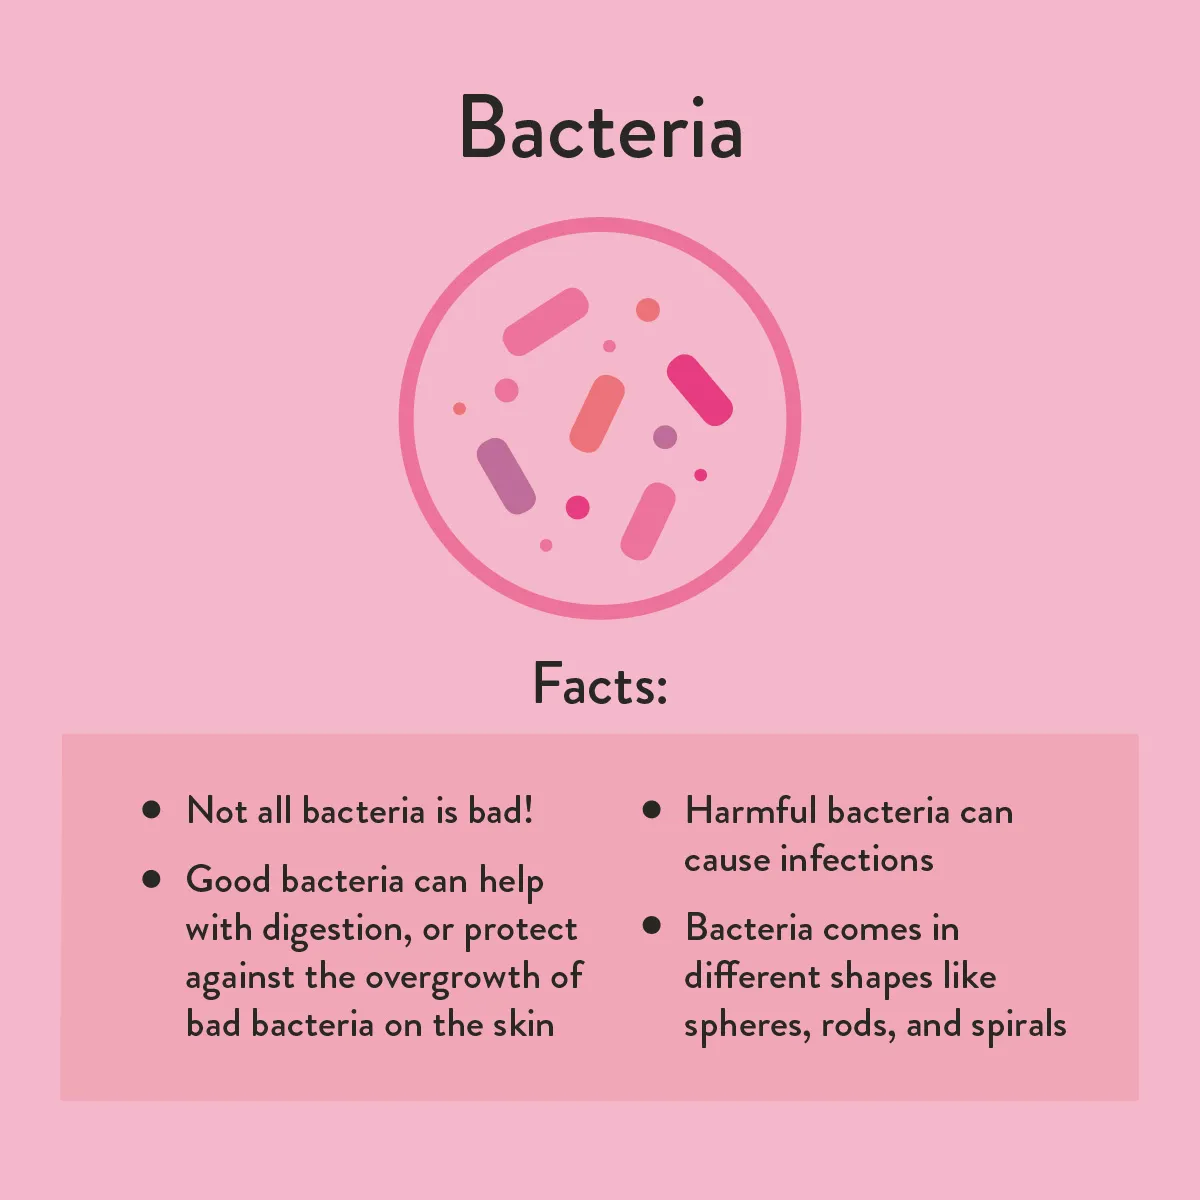 Facts about bacteria